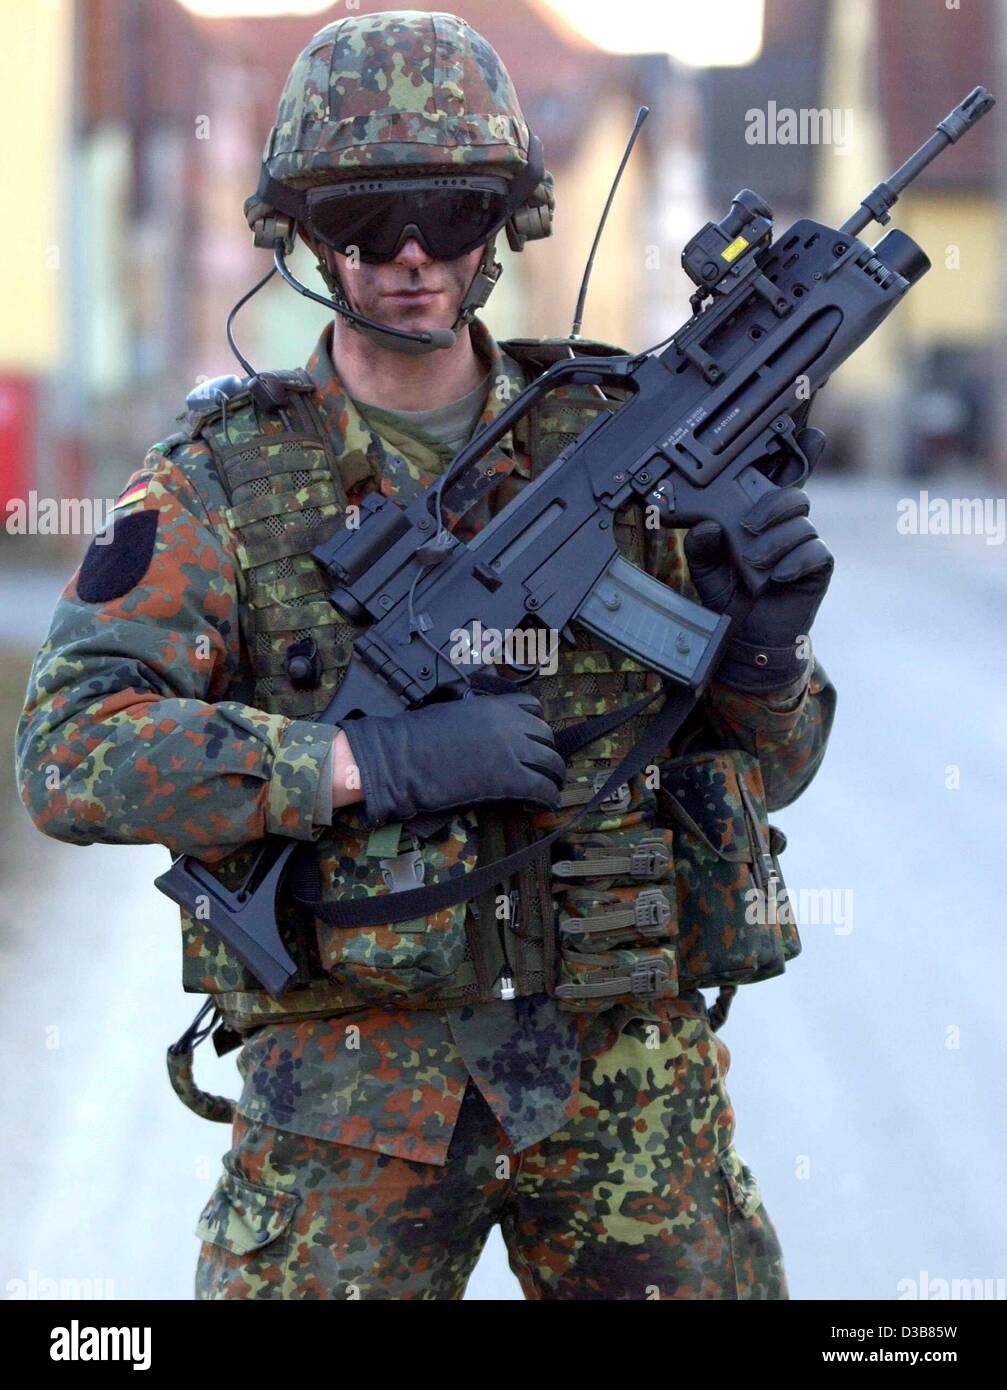 A soldier equipped with hi-tech weapon prototype is aiming at a target through a laser sight mounted on his gun in Hammelburg, Germany,  9 December 2002. The 'infantryman of the future' carries  communication aerials and a satellite navigation system. Though his vest is heavily armoured it's weight  Stock Photo